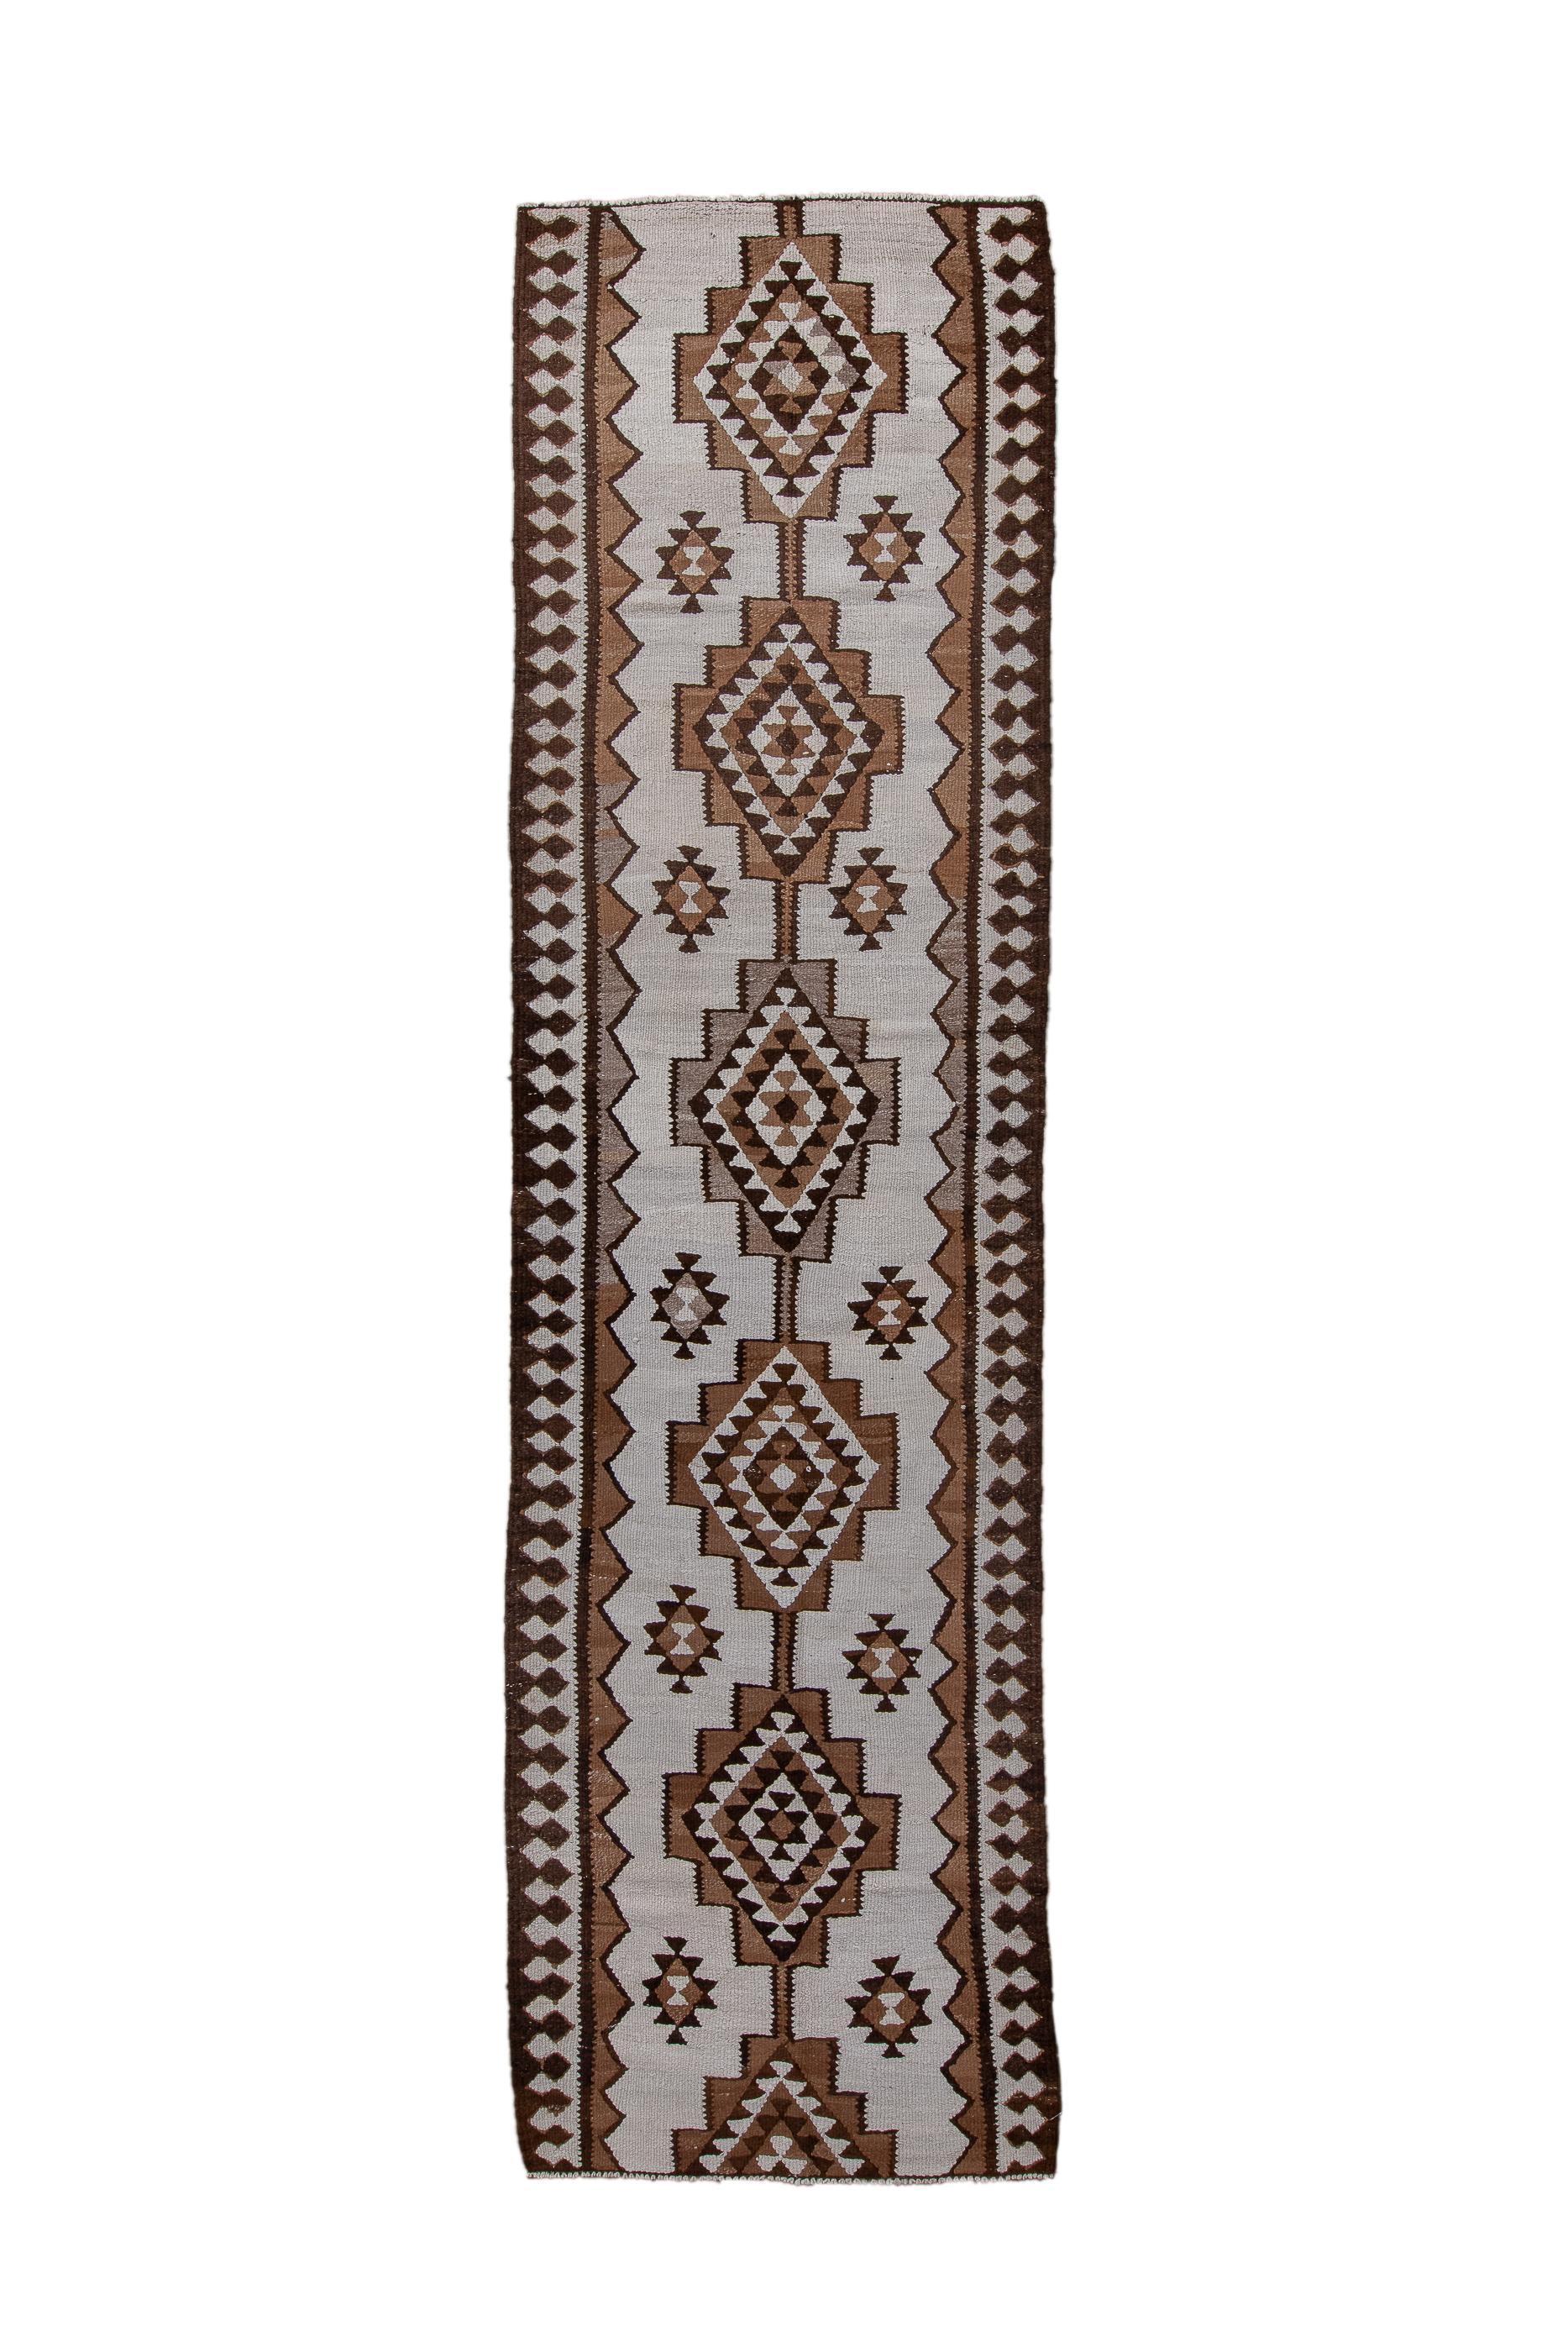 This wool weft faced, slit tapestry technique kenare (runner) displays an ecru field centred by a pole medallion of five and a half stepped and nested lozenges, detailed in coral and ecru. Small, upright ashik secondaries. Inner triangle band and a